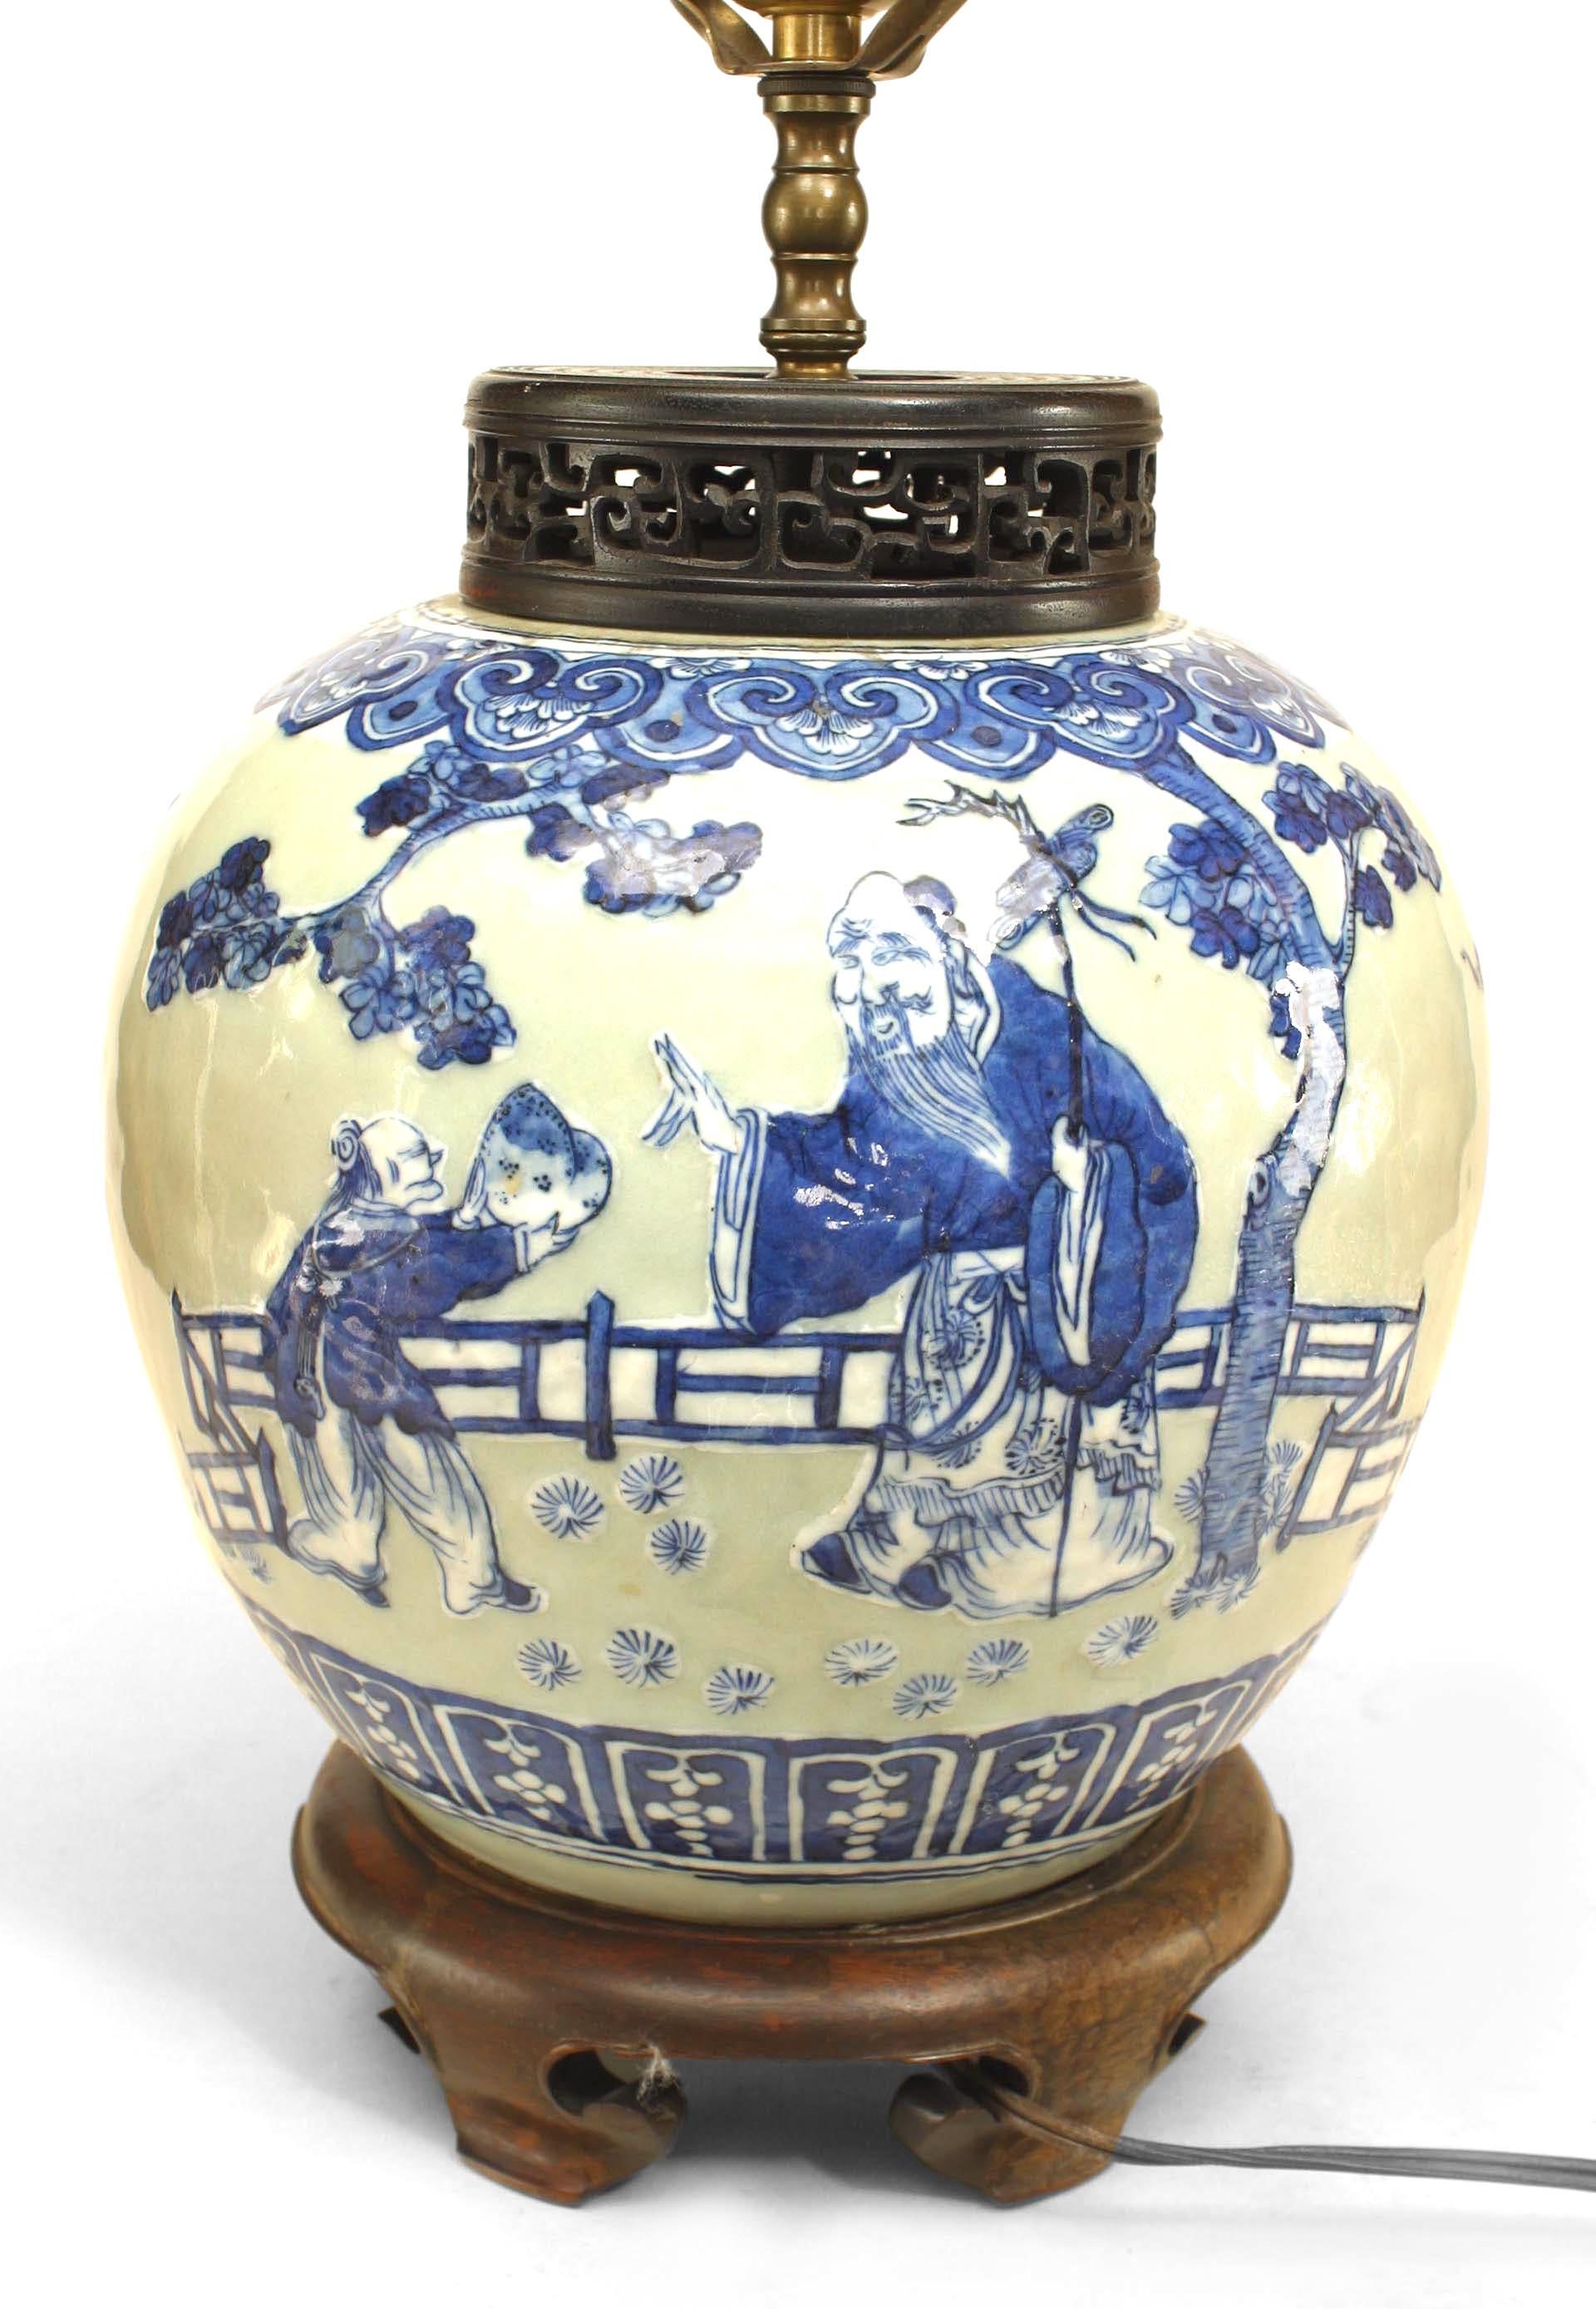 Asian Chinese style (19th Century) celadon porcelain lamp with blue figural scene and mounted on a round teak base and filigree cover.
